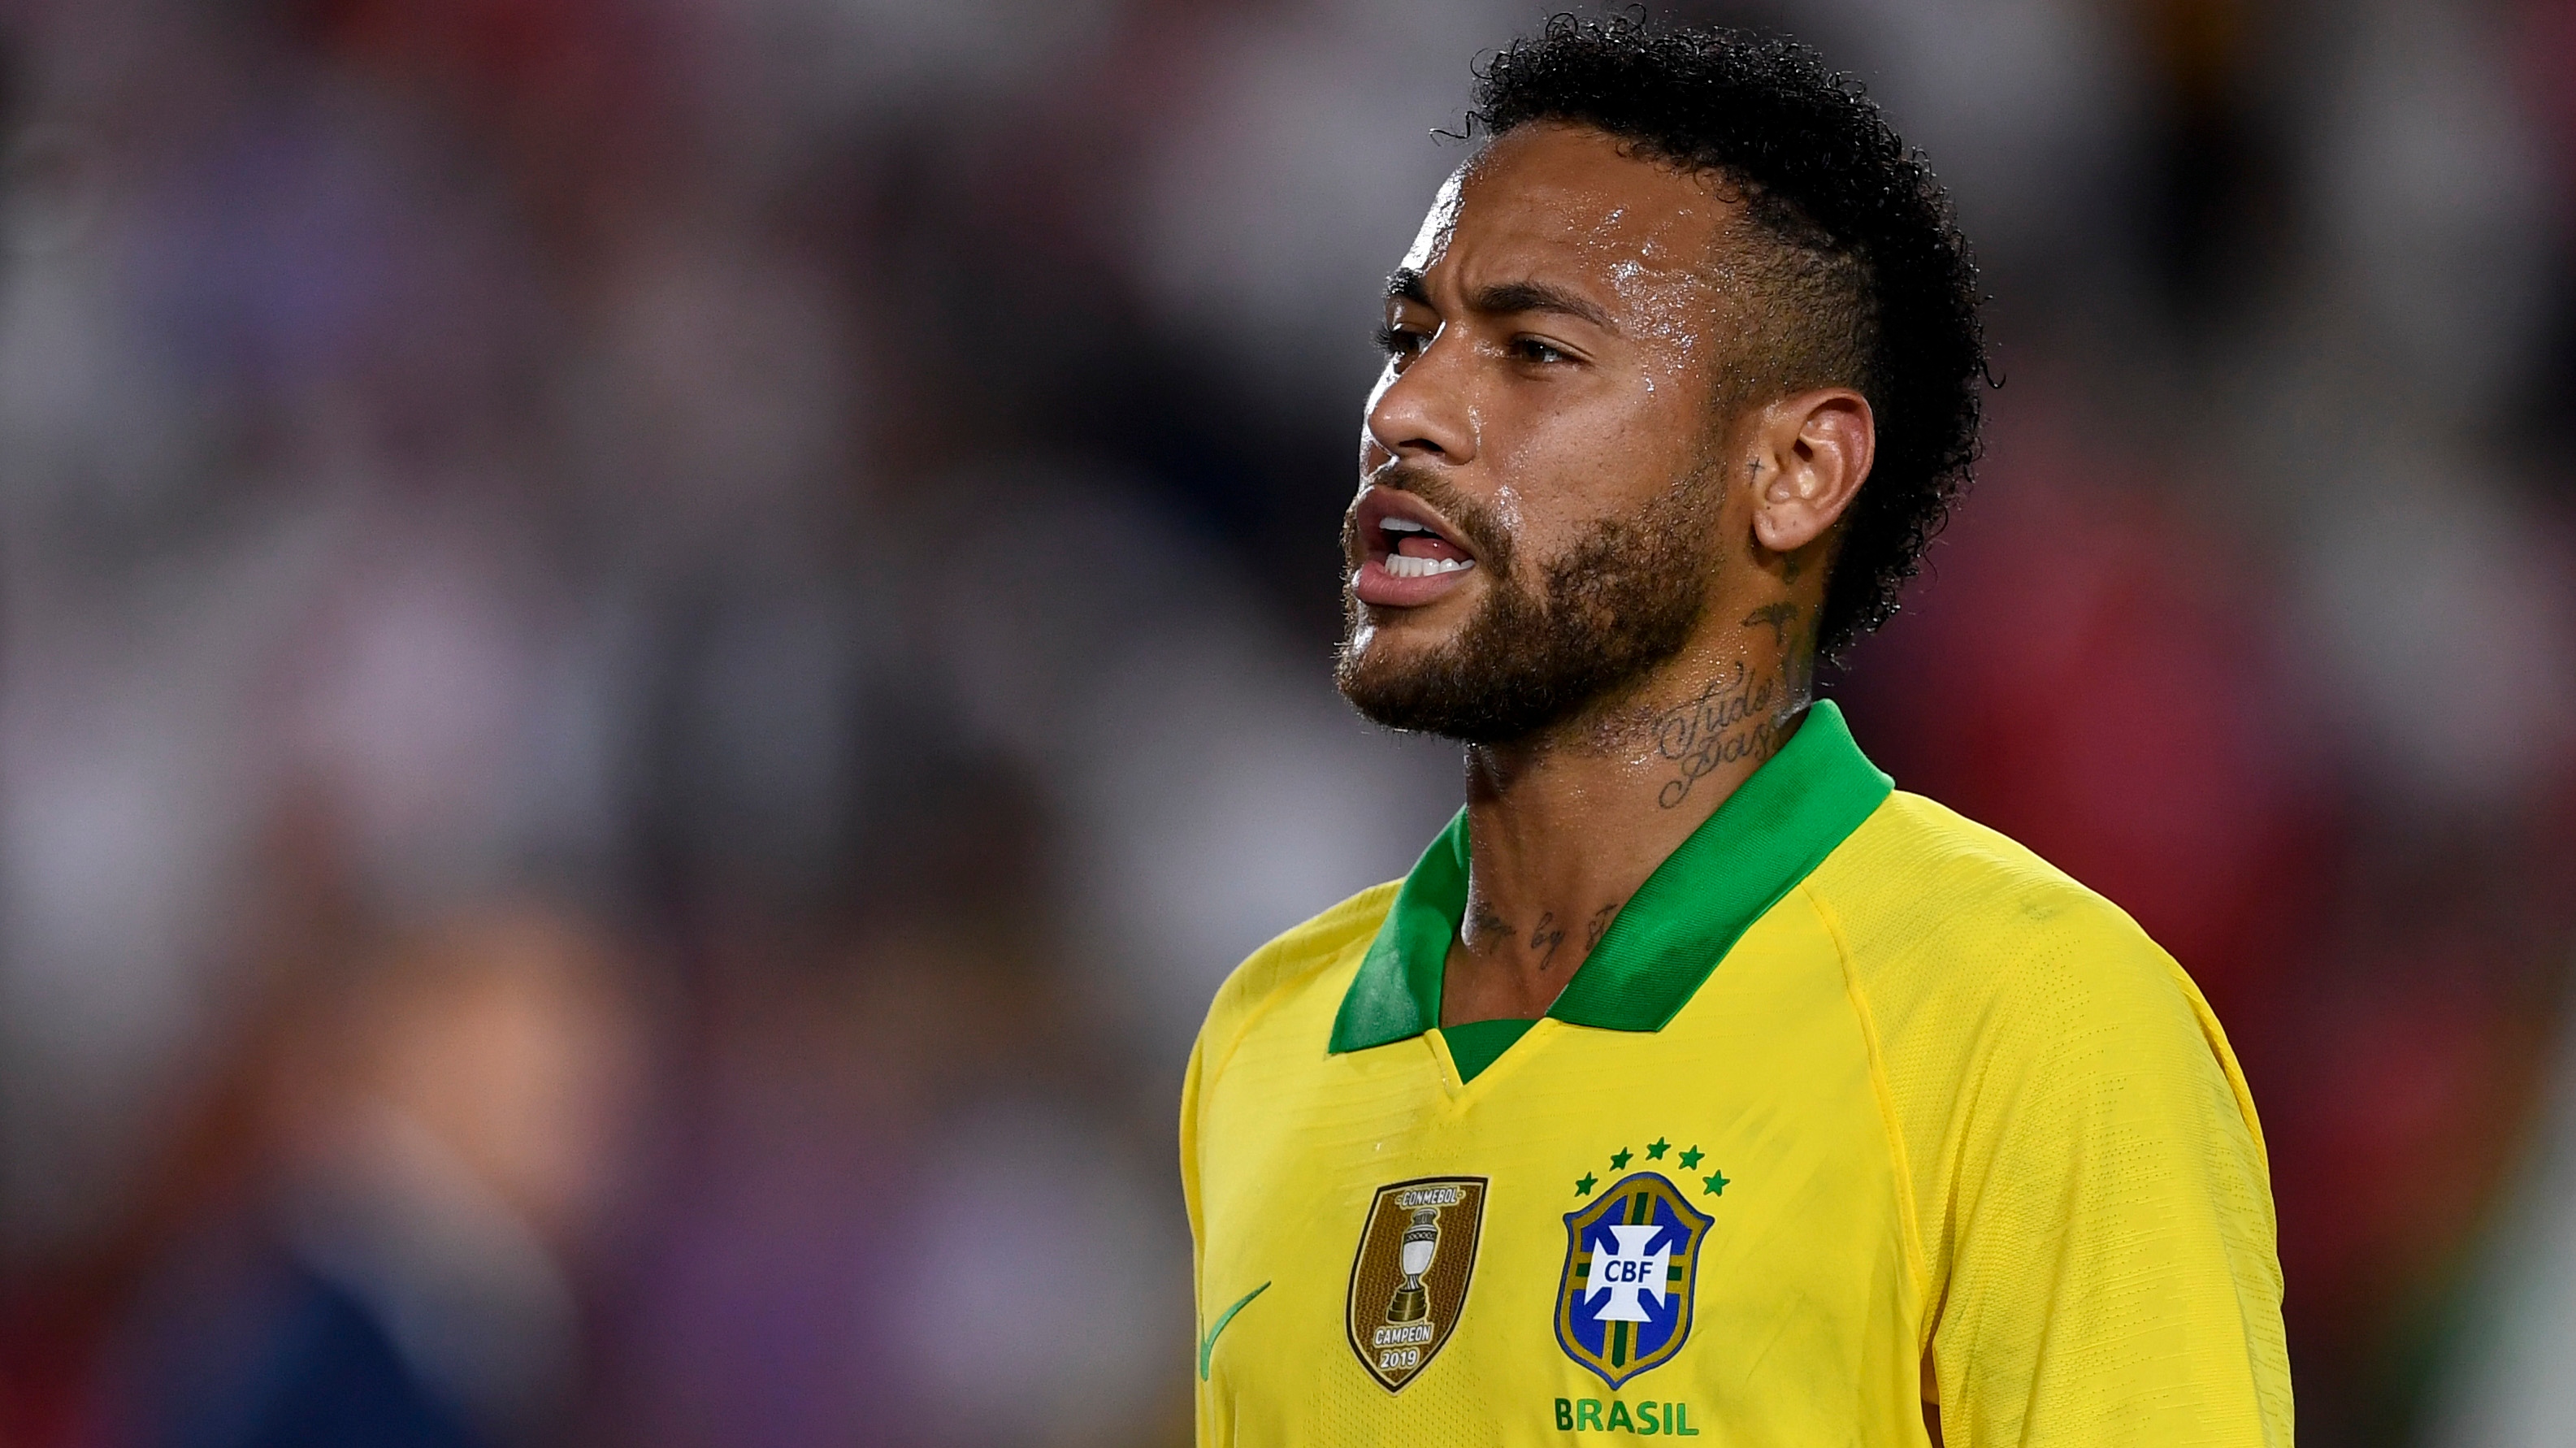 Neymar Nike Sponsor Split Was Due To Sexual Assault Allegations Sports Illustrated